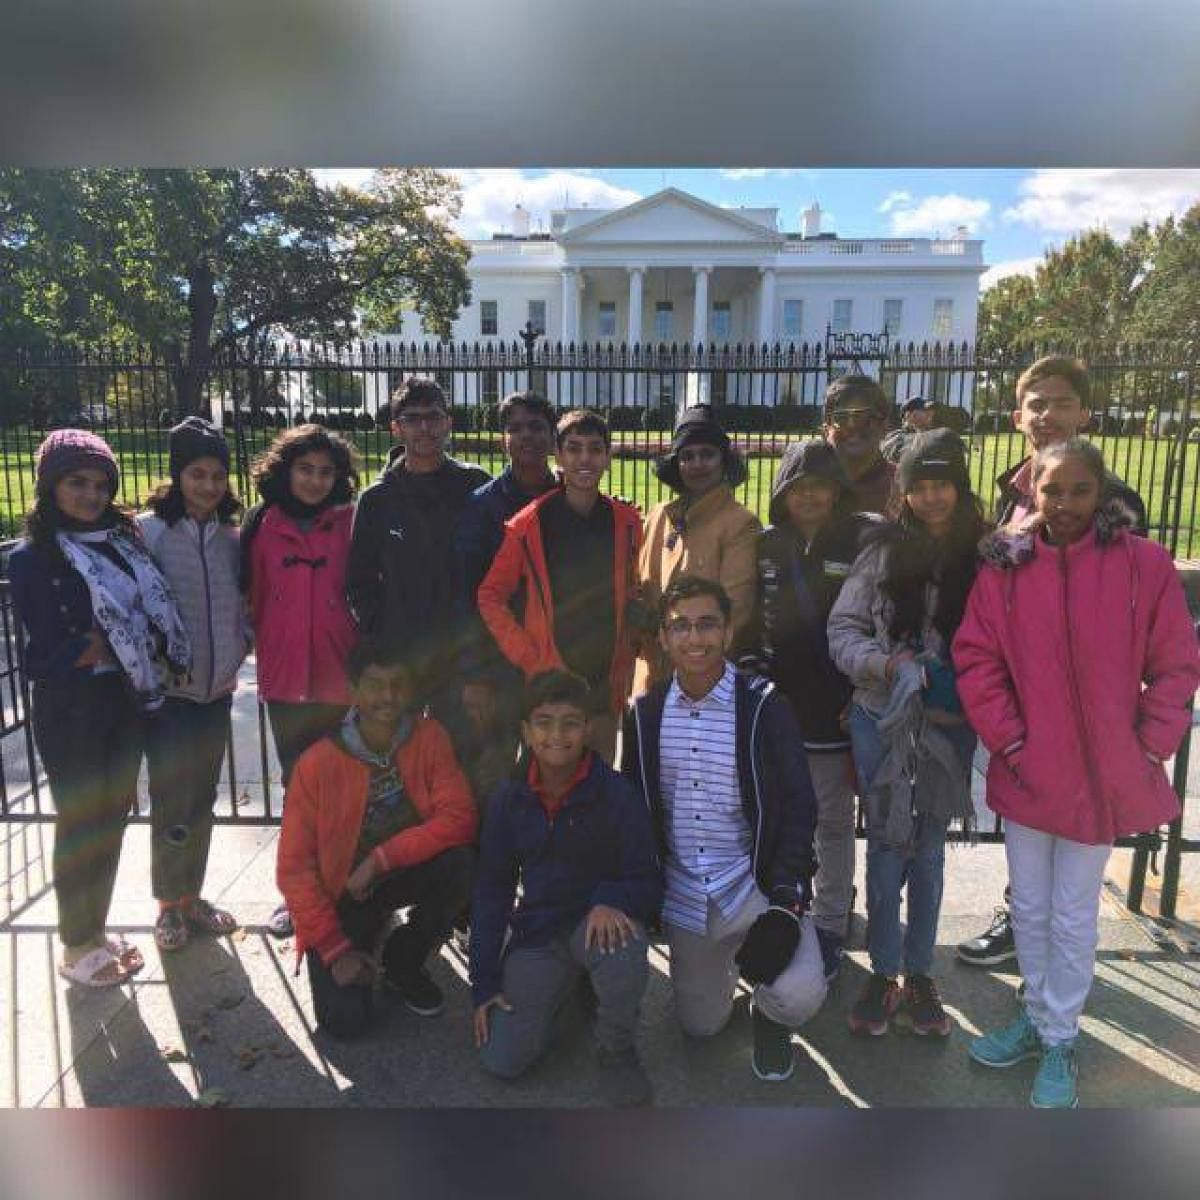 The students of Silicon City Academy of Secondary Education visited the Kennedy Space Centre and NASA during their recent trip to the US.